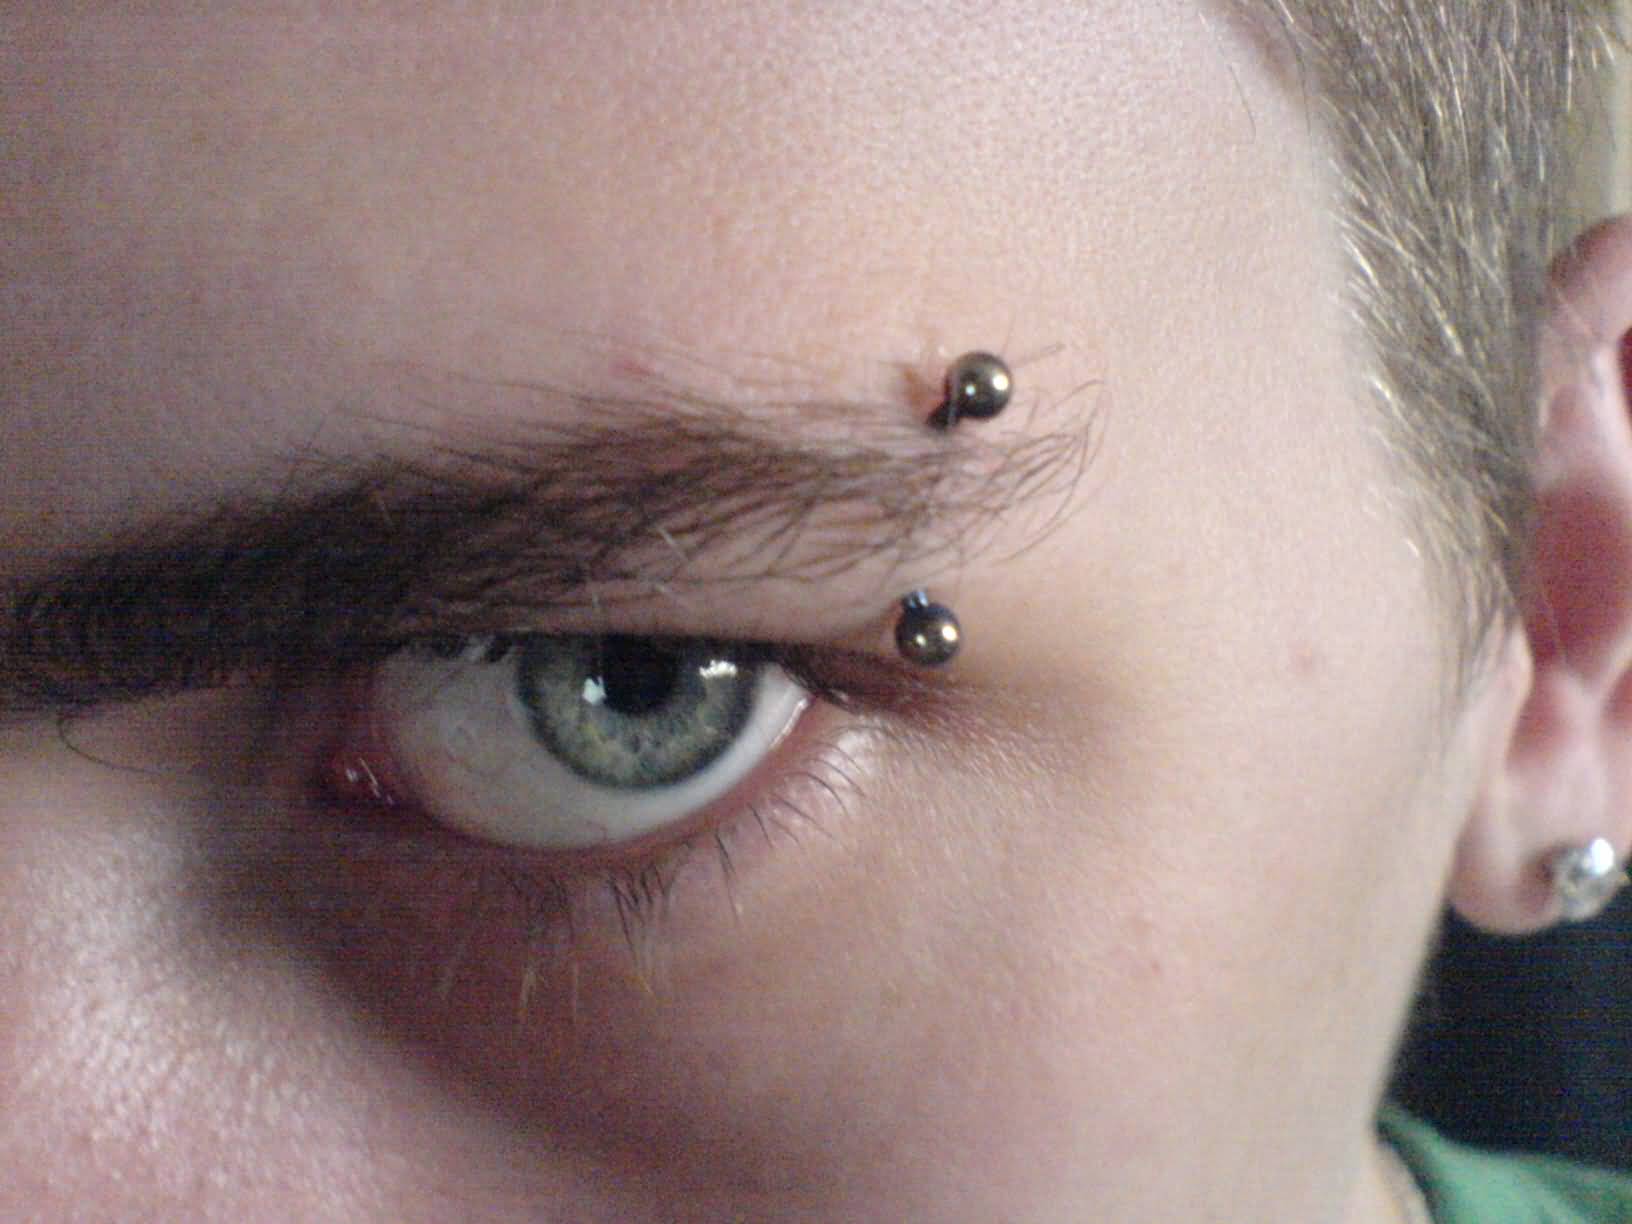 Eyebrow Piercing With Curved Barbell